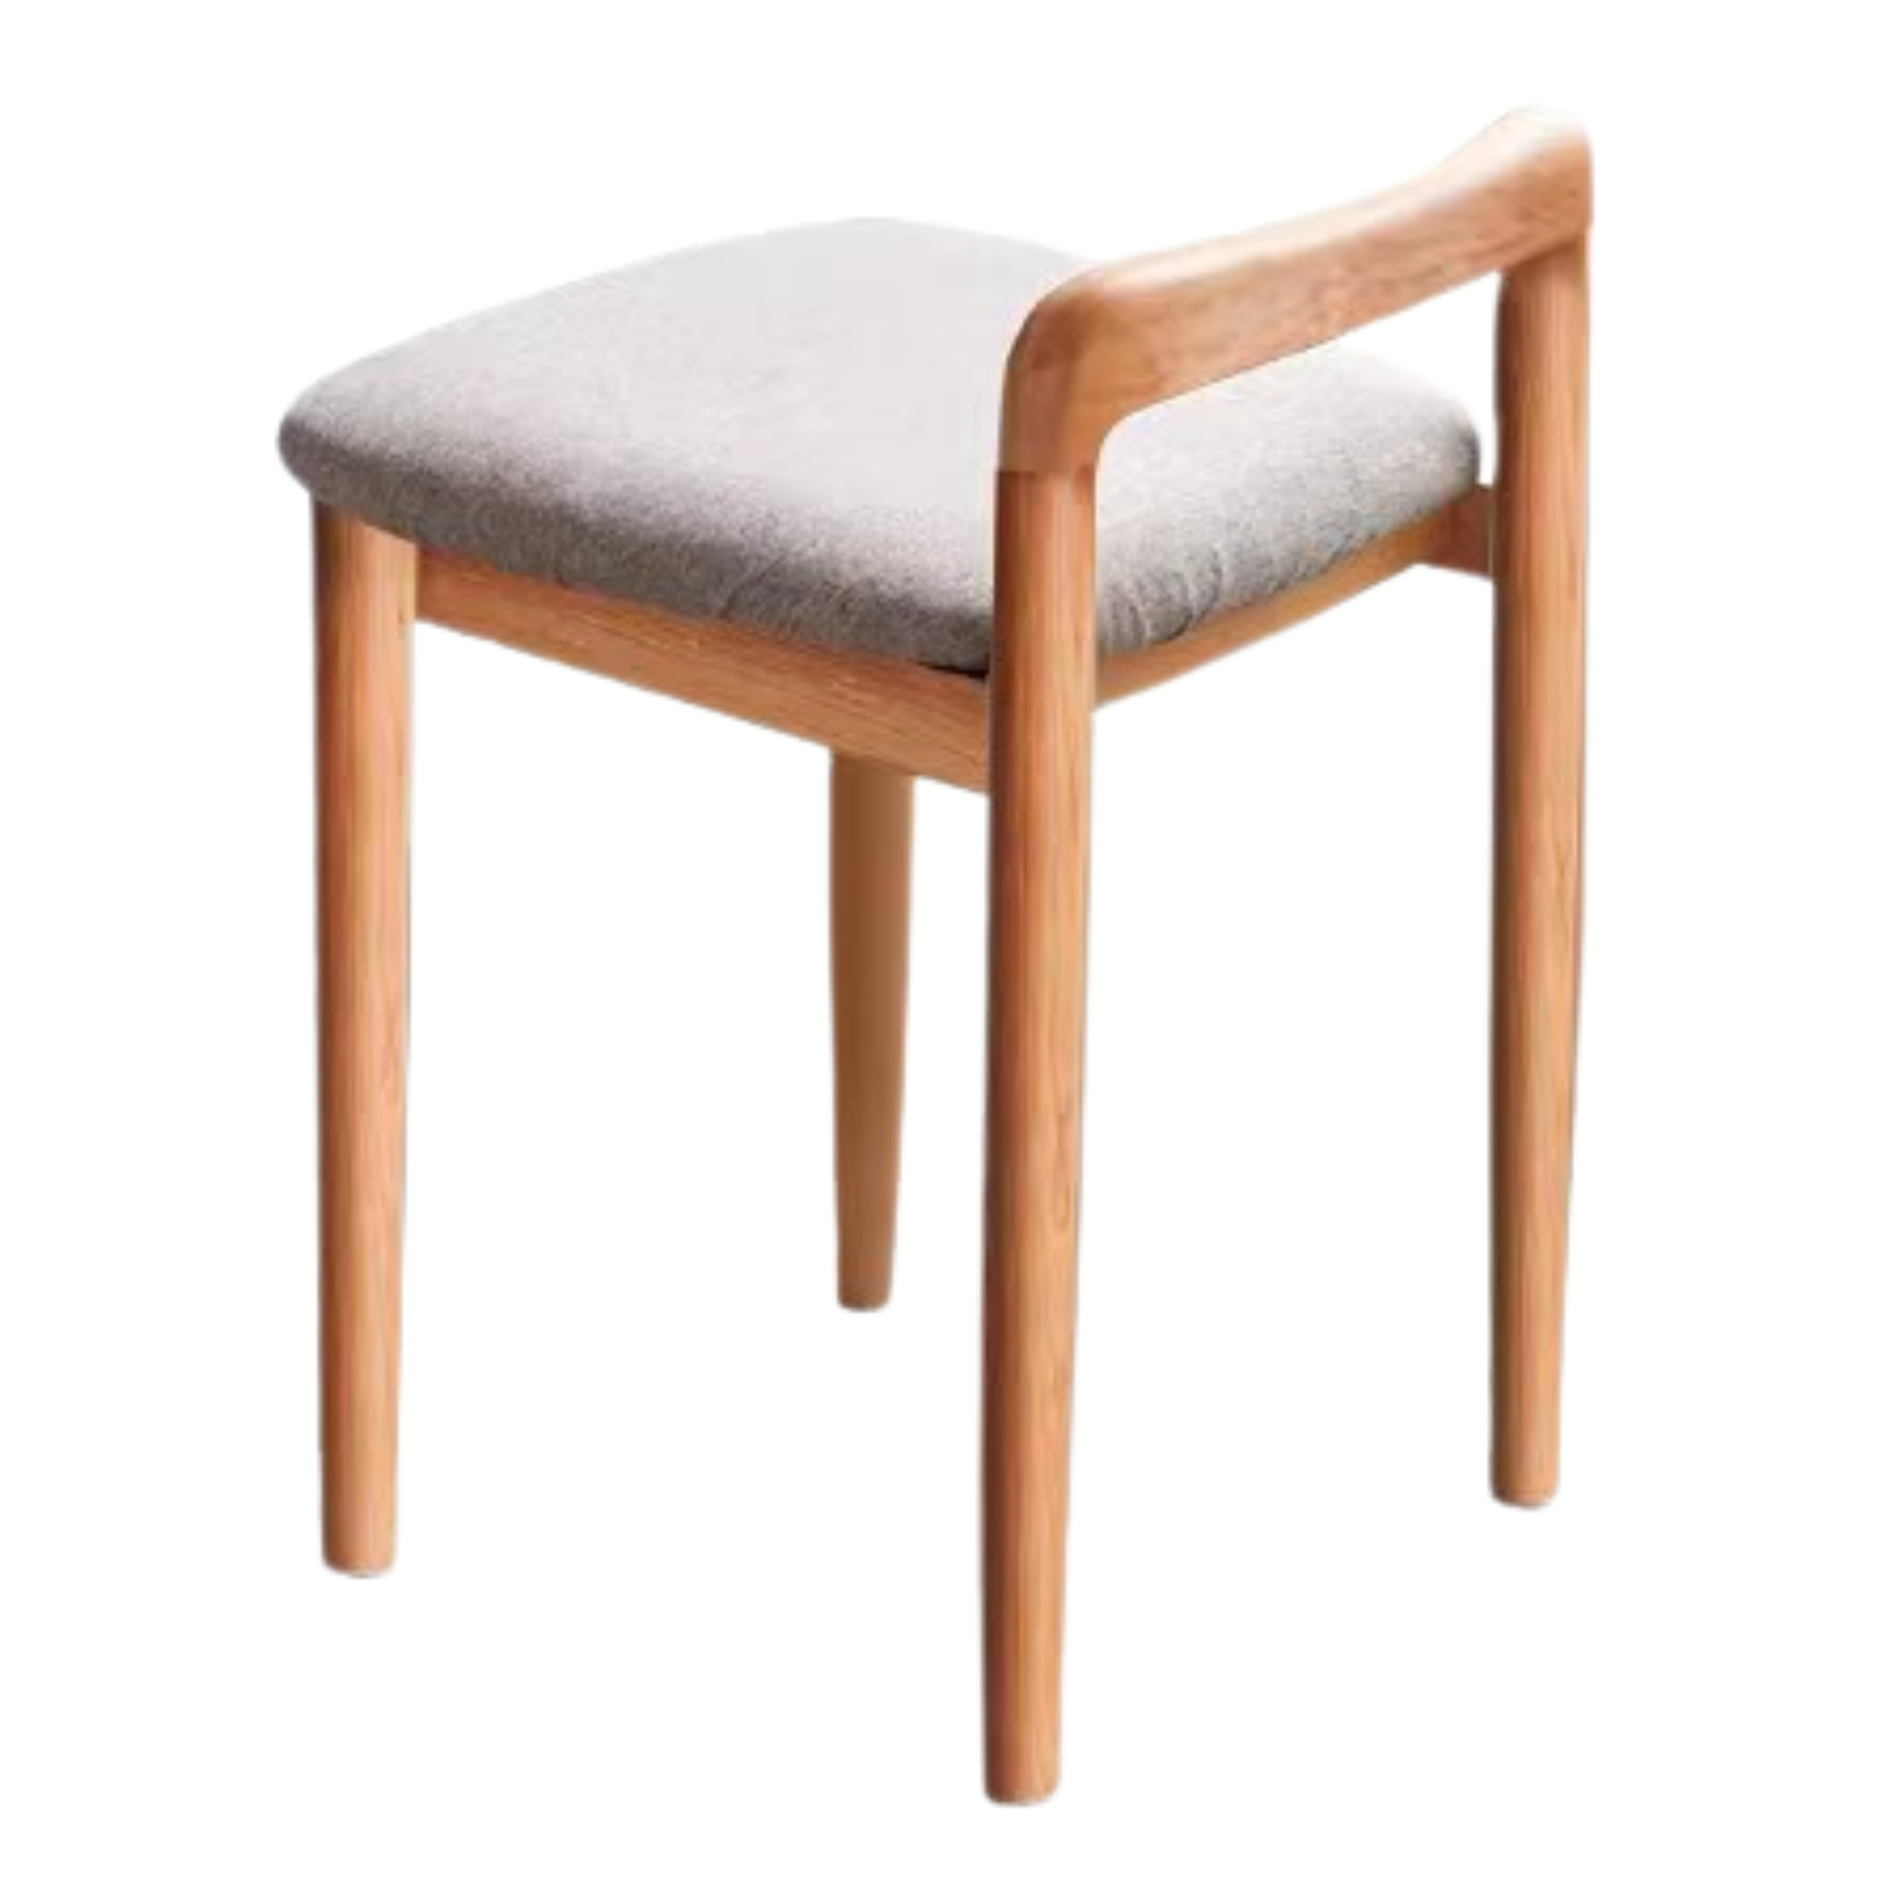 Solid wood Makeup stool chair